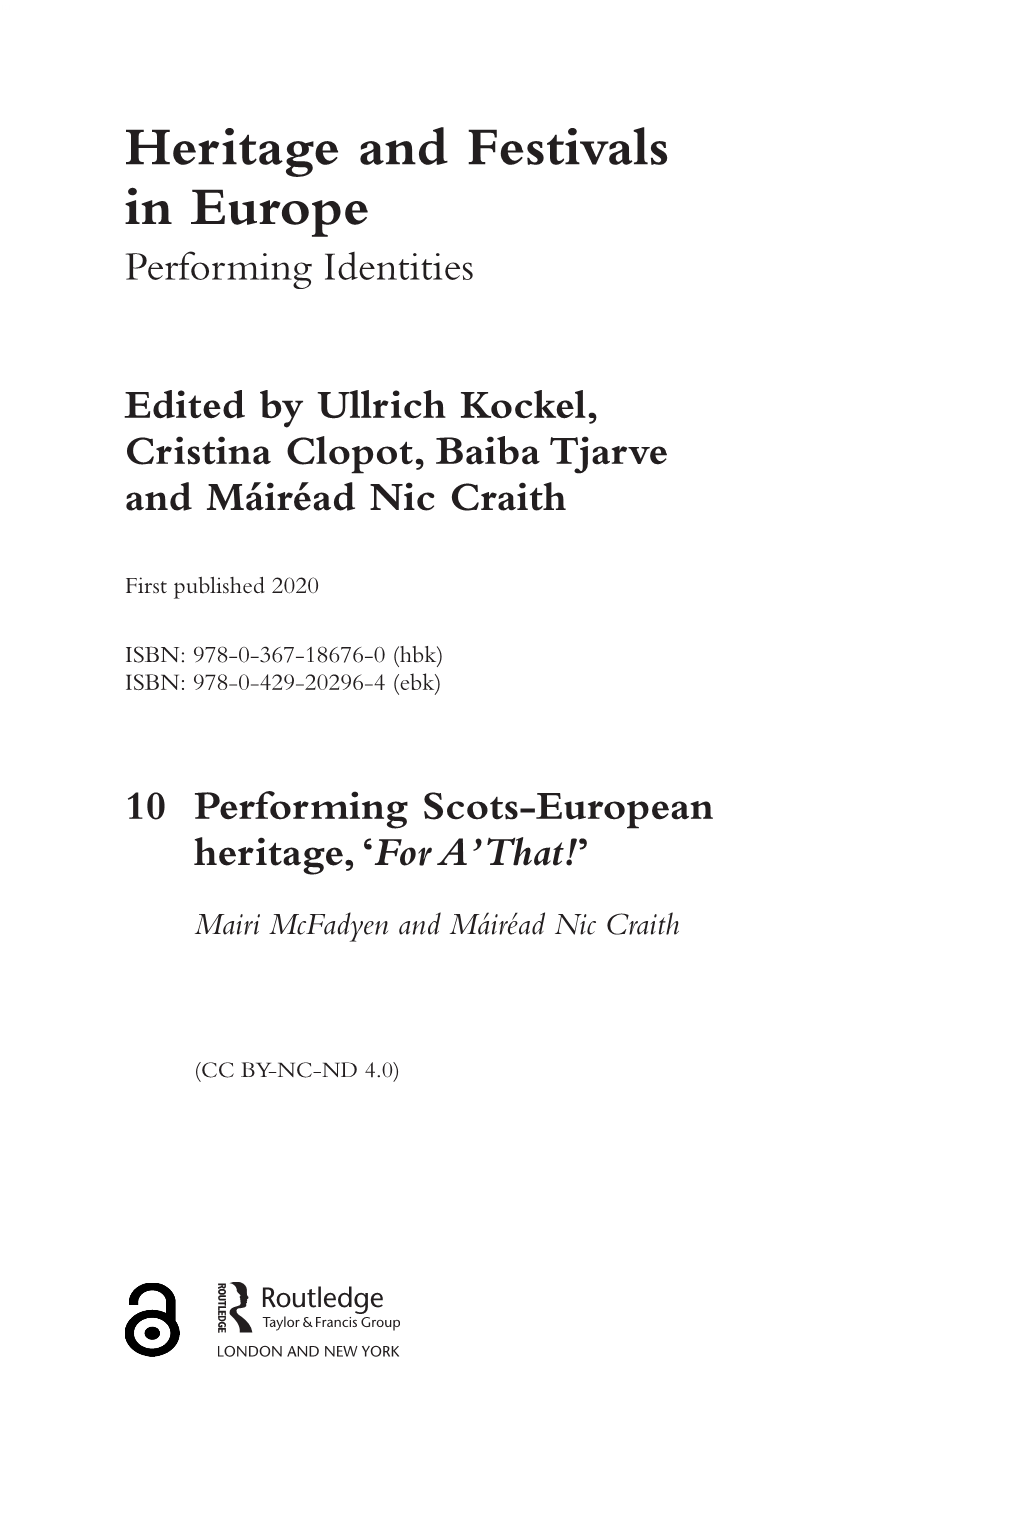 Heritage and Festivals in Europe Performing Identities